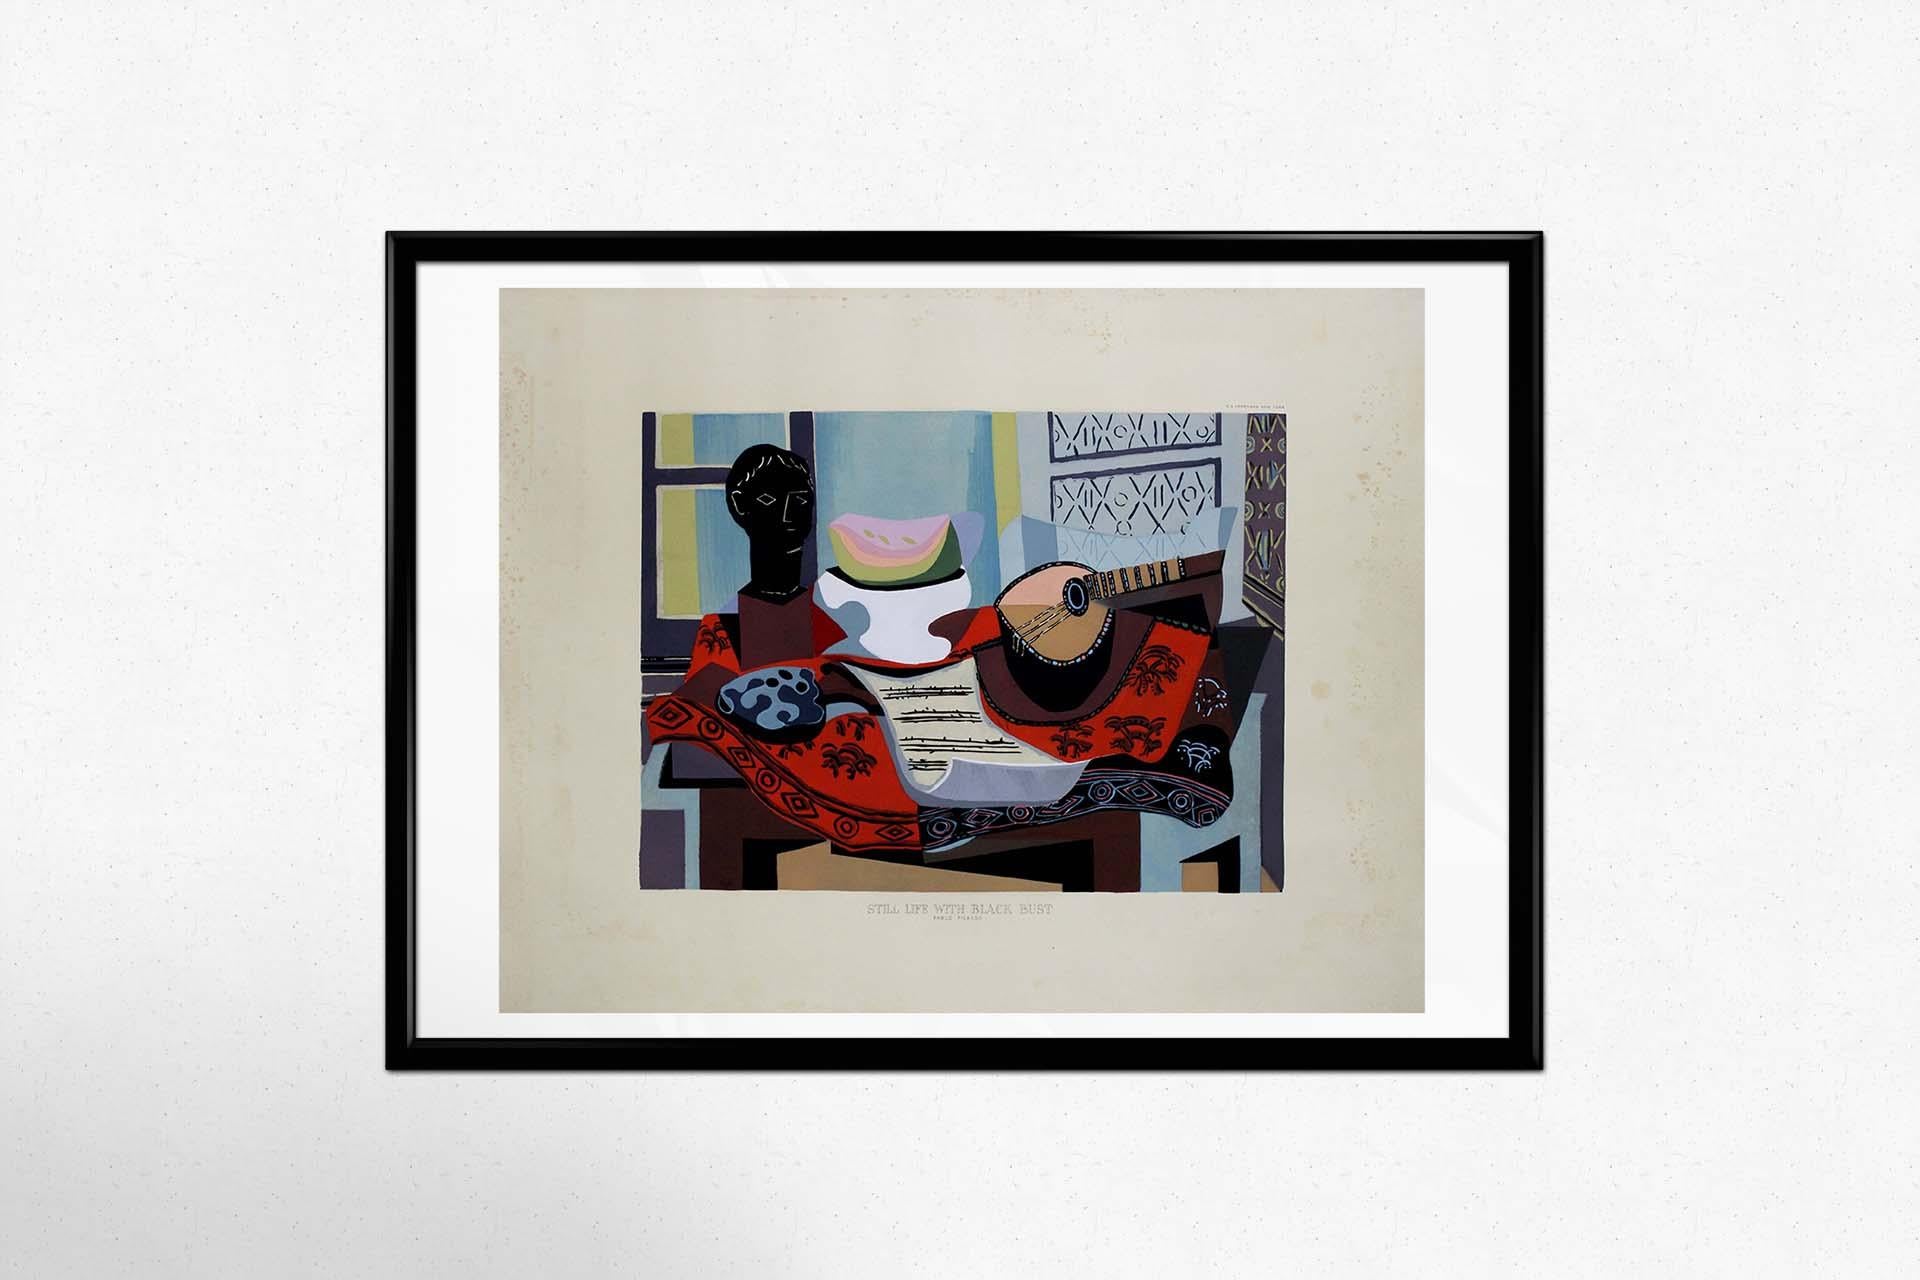 Circa 1950 Original lithograph by Pablo Picasso - Still Life with Black Bust For Sale 1